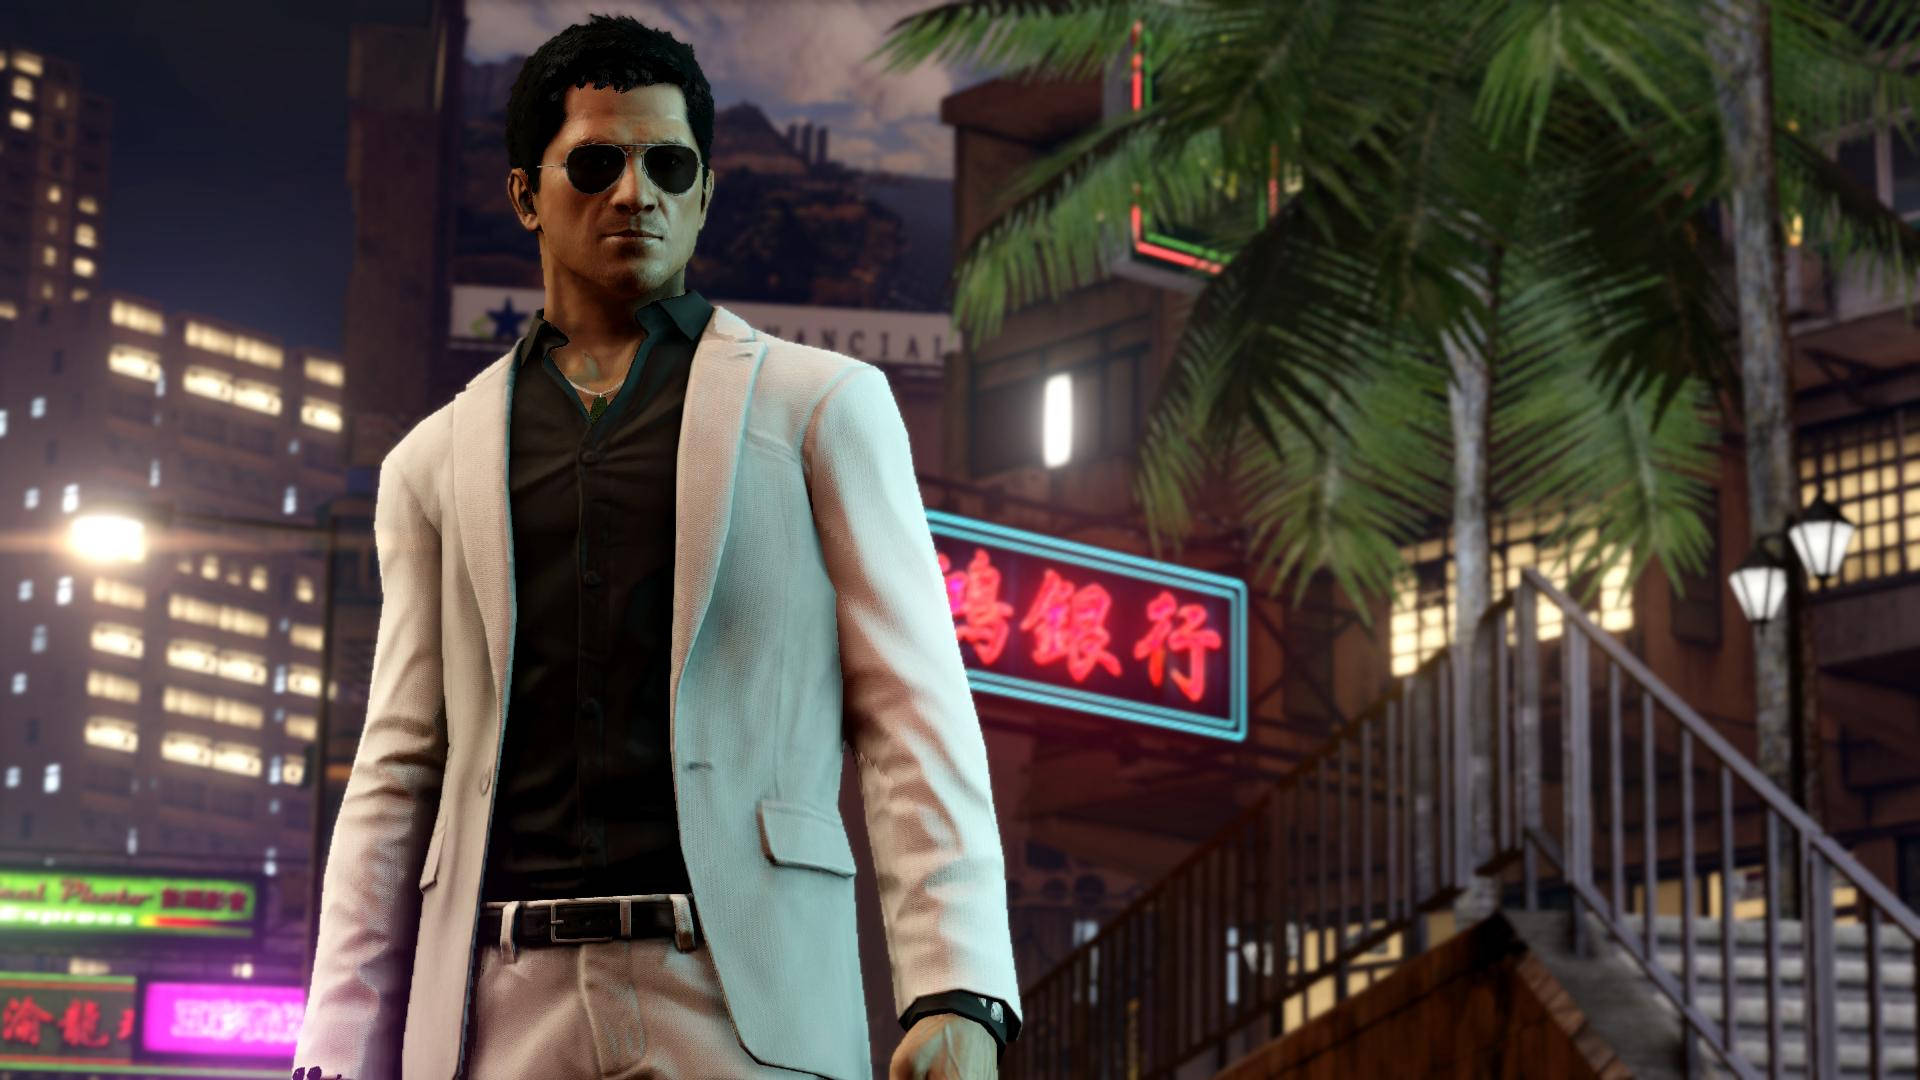 Check Out Sleeping Dogs Game, an Intense Open World Action-Adventure Wallpaper